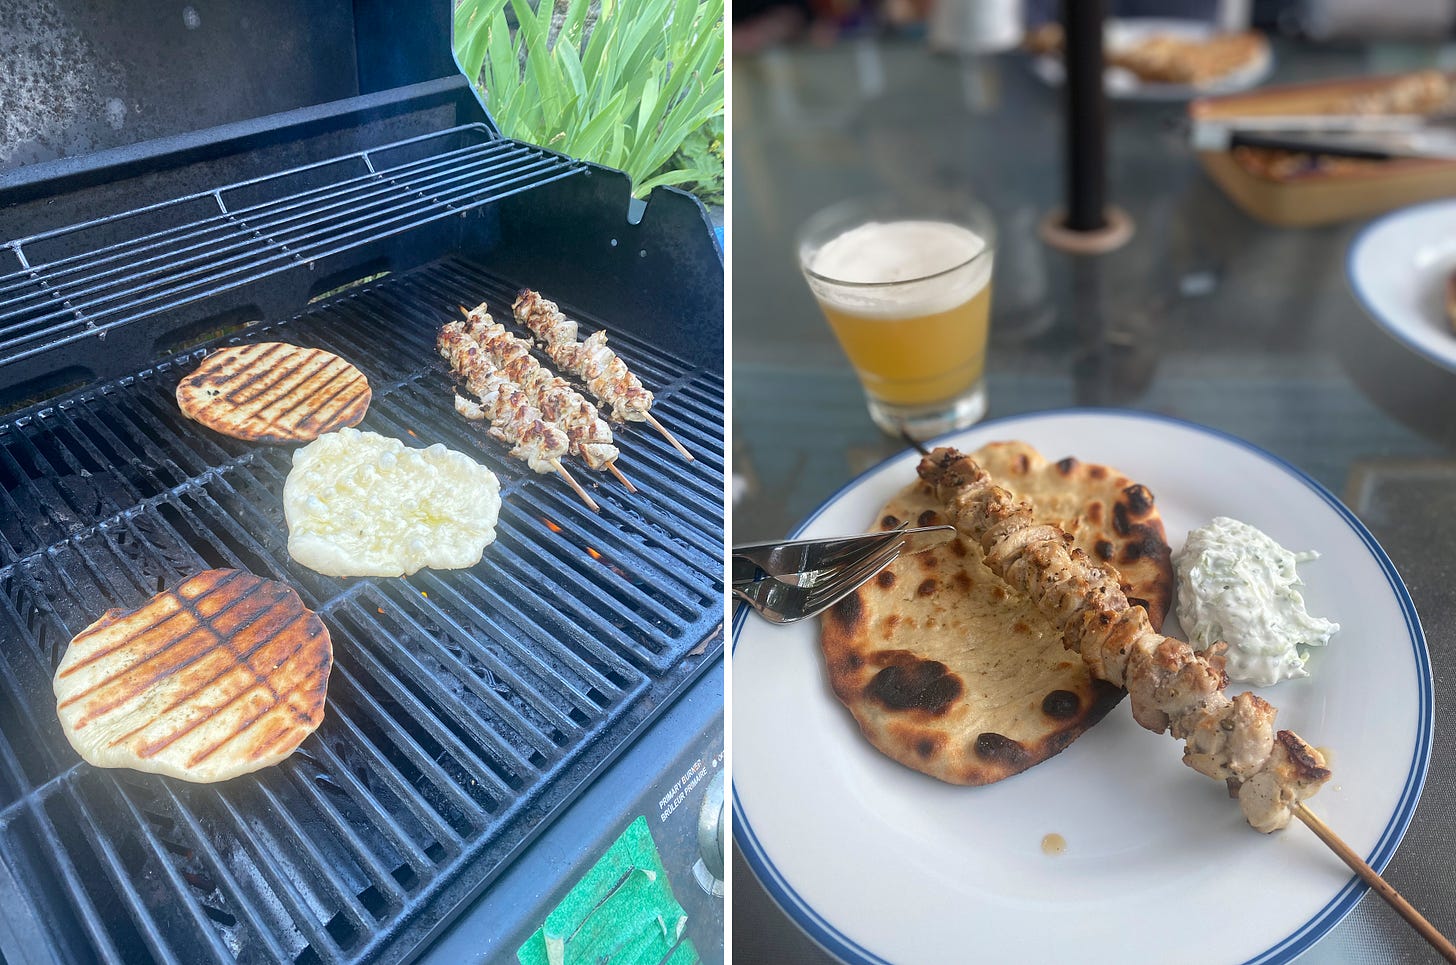 Left image: on a gas grill, three pieces of flatbread, two of them flipped over and charred already, the other soft and bubbling on top. Next to it are three souvlaki skewers. Right image: A plate with a piece of the flatbread and one of the skewers on top, and a dollop of tzatziki on the side. A knife and fork rest at the edge of the plate, and a glass of beer is on the table in the background.